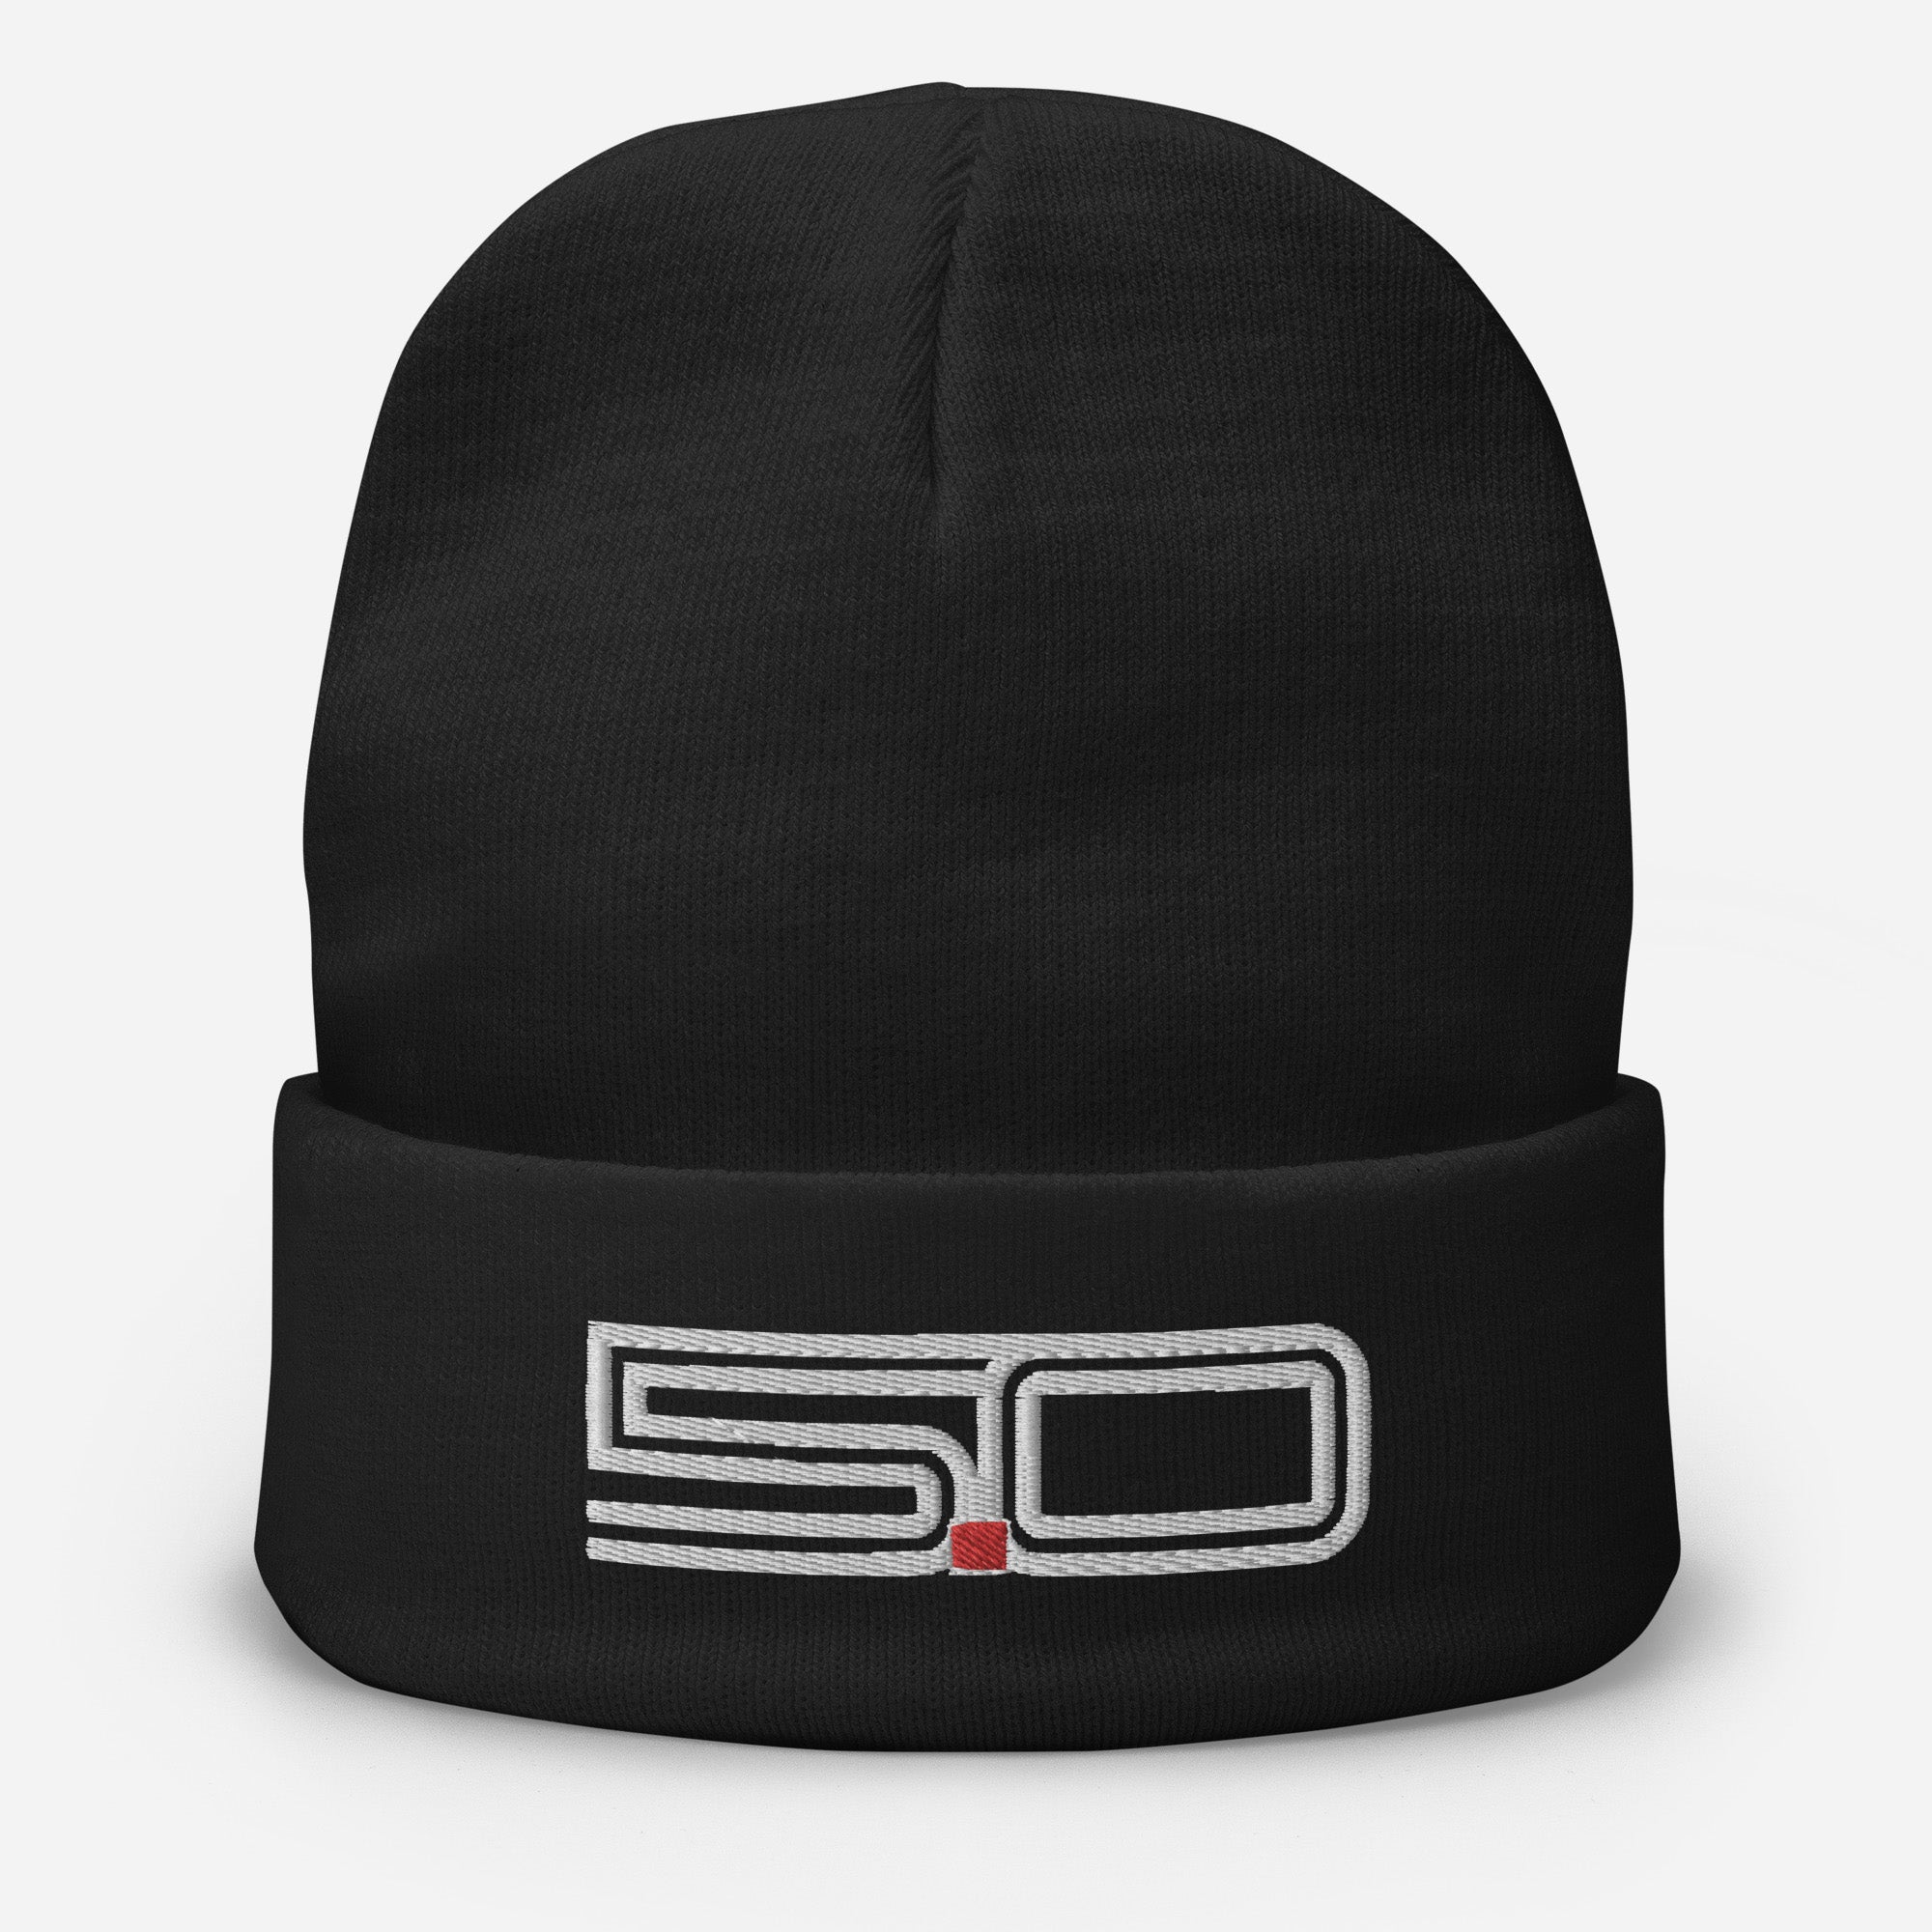 5.0 Embroidered Beanie